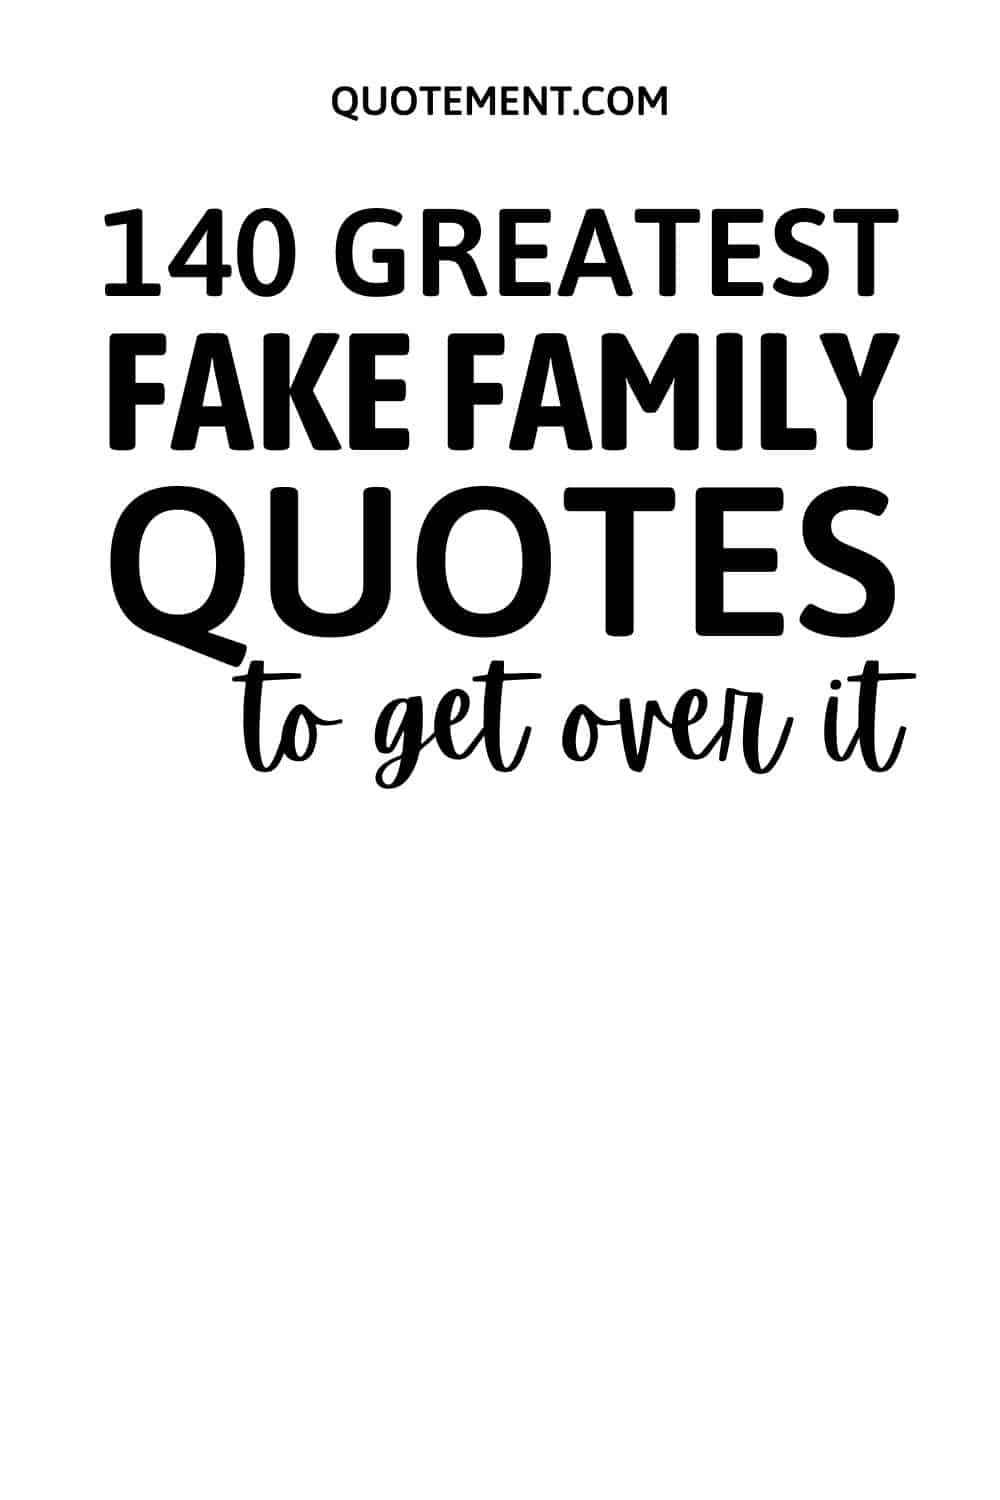 140 Greatest Fake Family Quotes To Get Over It
